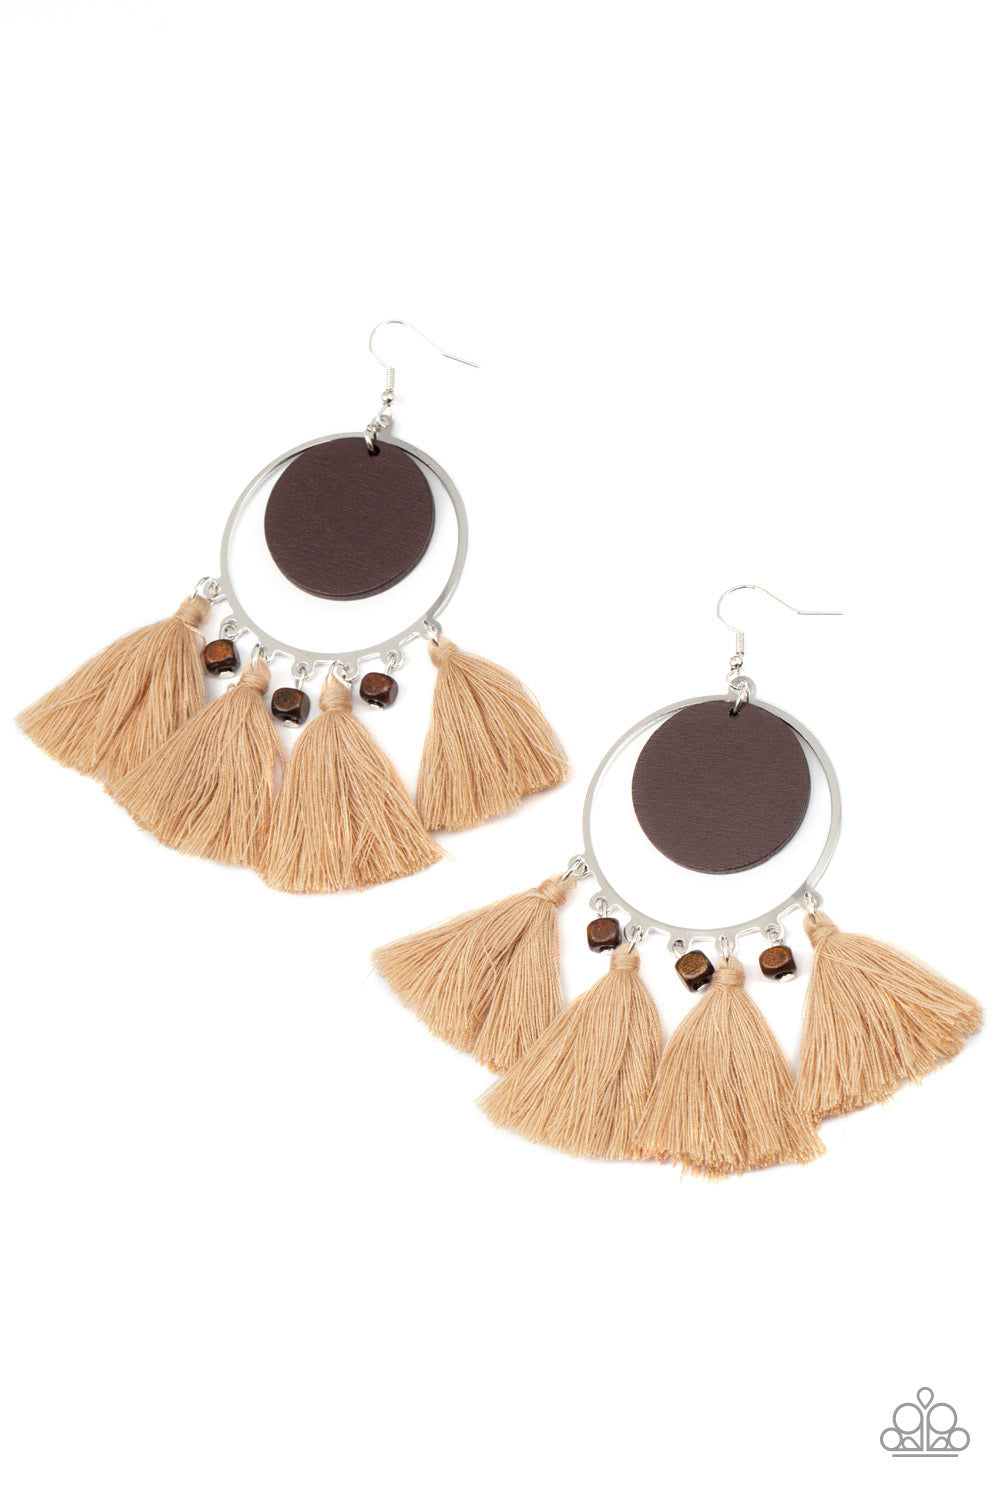 Paparazzi Accessories Yacht Bait - Brown Earrings wooden disc swings from the top of a shiny silver hoop that is adorned in dainty wooden cube beads and Desert Mist threaded tassels, creating an earthy fringe. Earring attaches to a standard fishhook fitting.  Sold as one pair of earrings.  Paparazzi Jewelry is lead and nickel free so it's perfect for sensitive skin too!